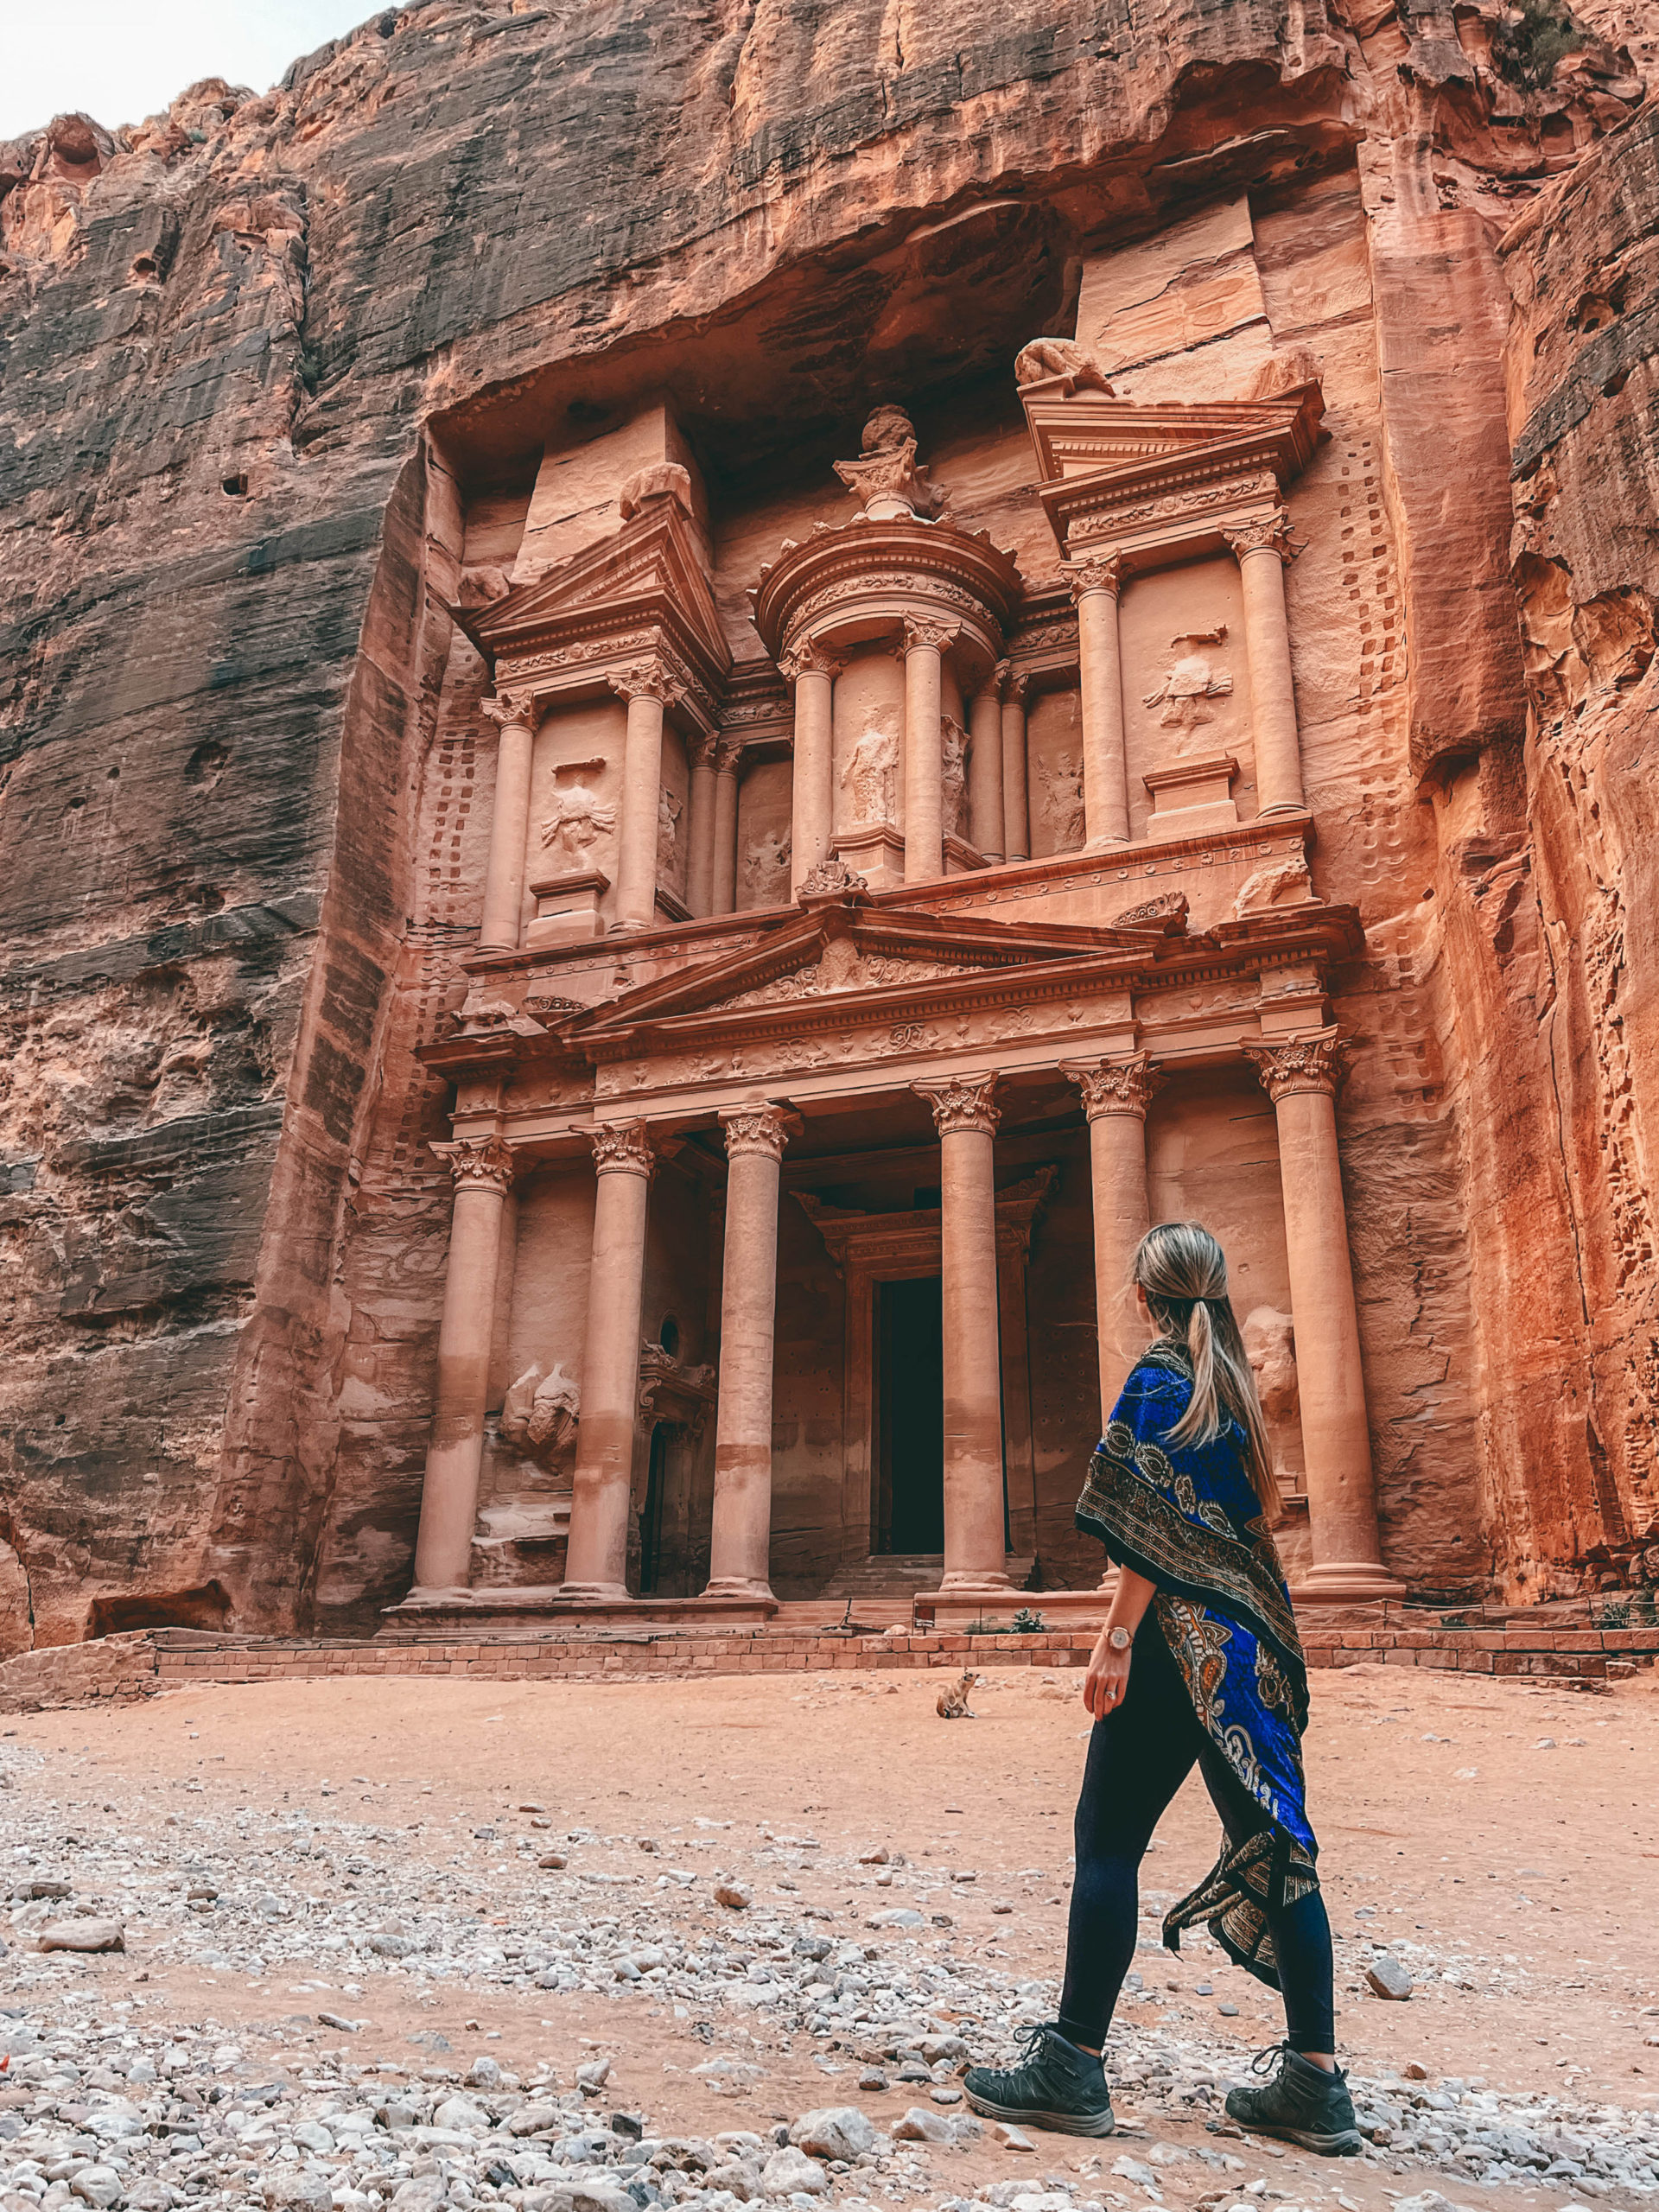 Jordan Travel Guide: The Best Things To See & Do In Jordan and Petra